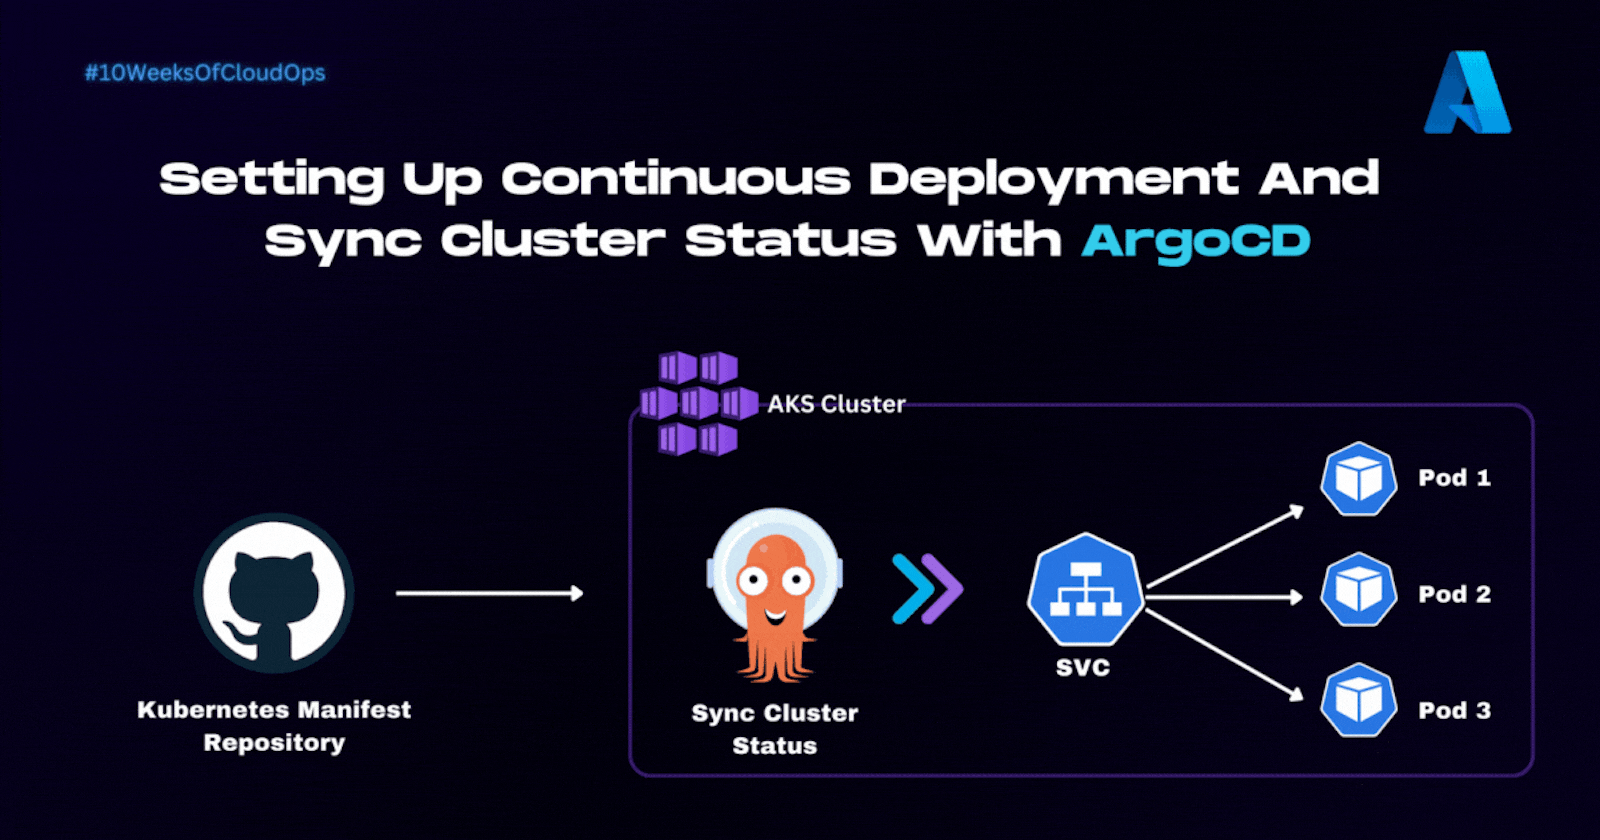 How to Install ArgoCD on an AKS Cluster and Sync Cluster Status With a Kubernetes Manifest Repository